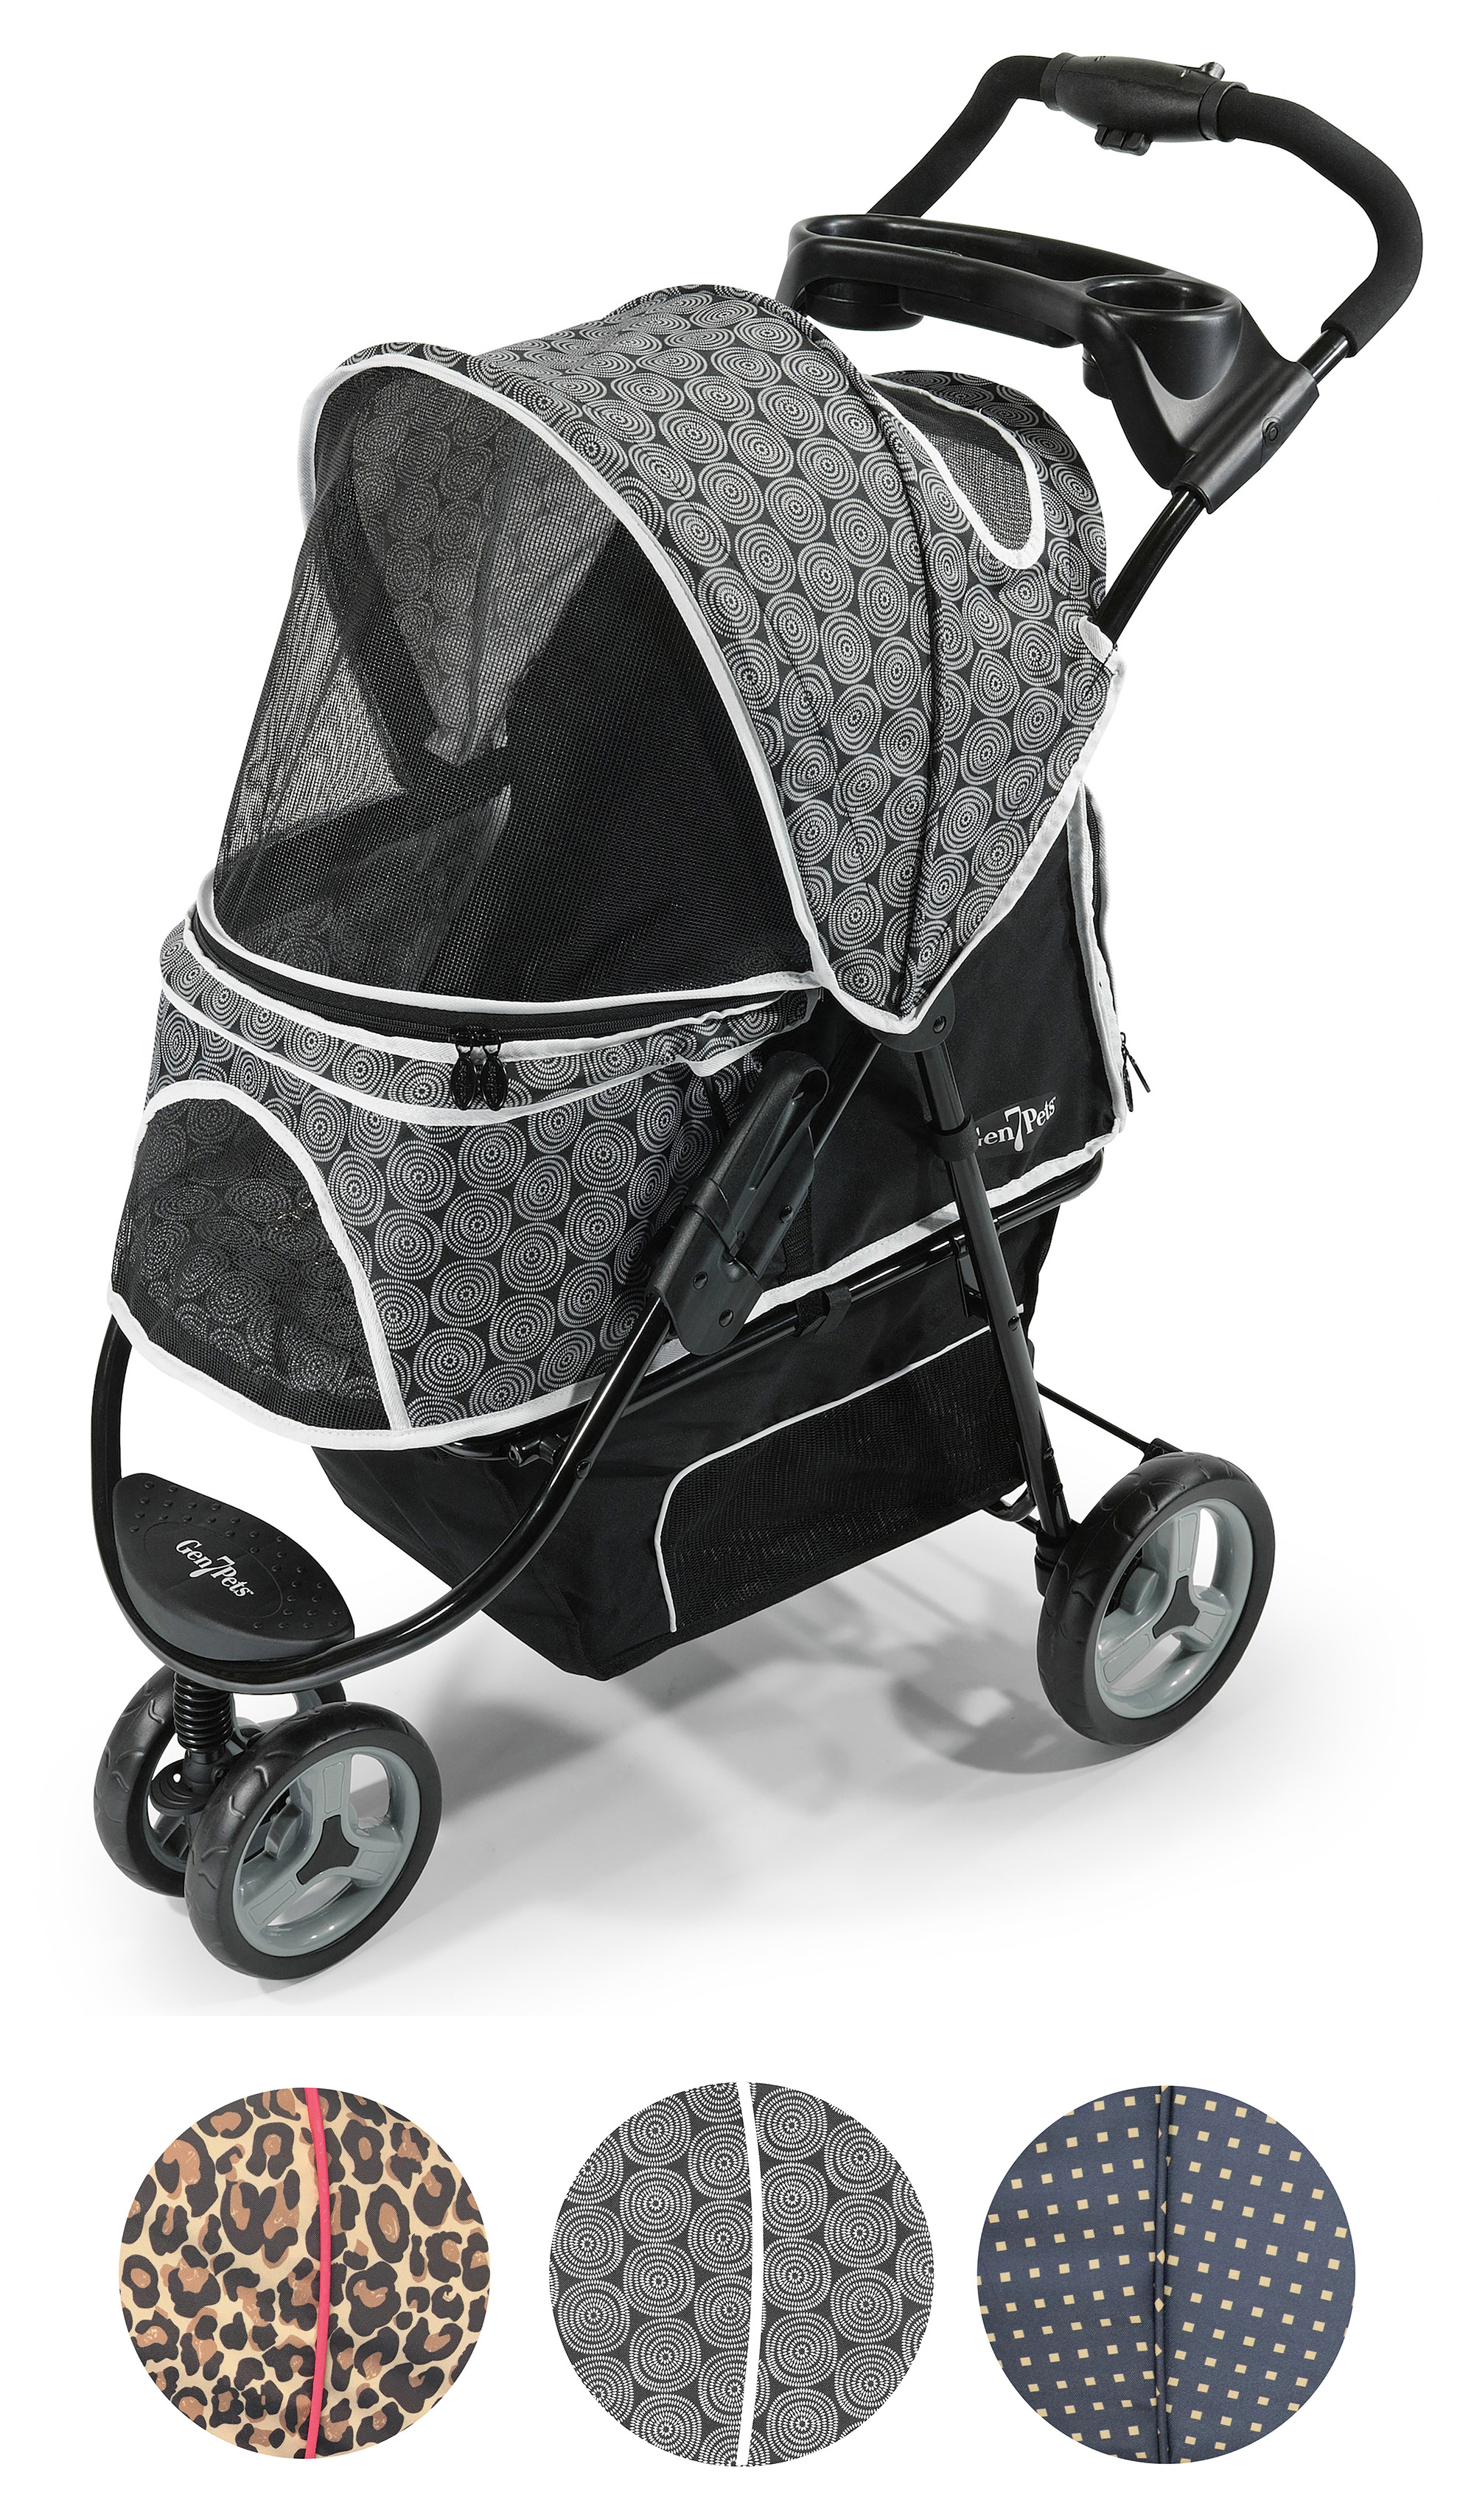 Gen7 Pets Promenade 35" Pet Stroller for Dogs and Pets upto 50 lb, Black Onyx - image 1 of 9